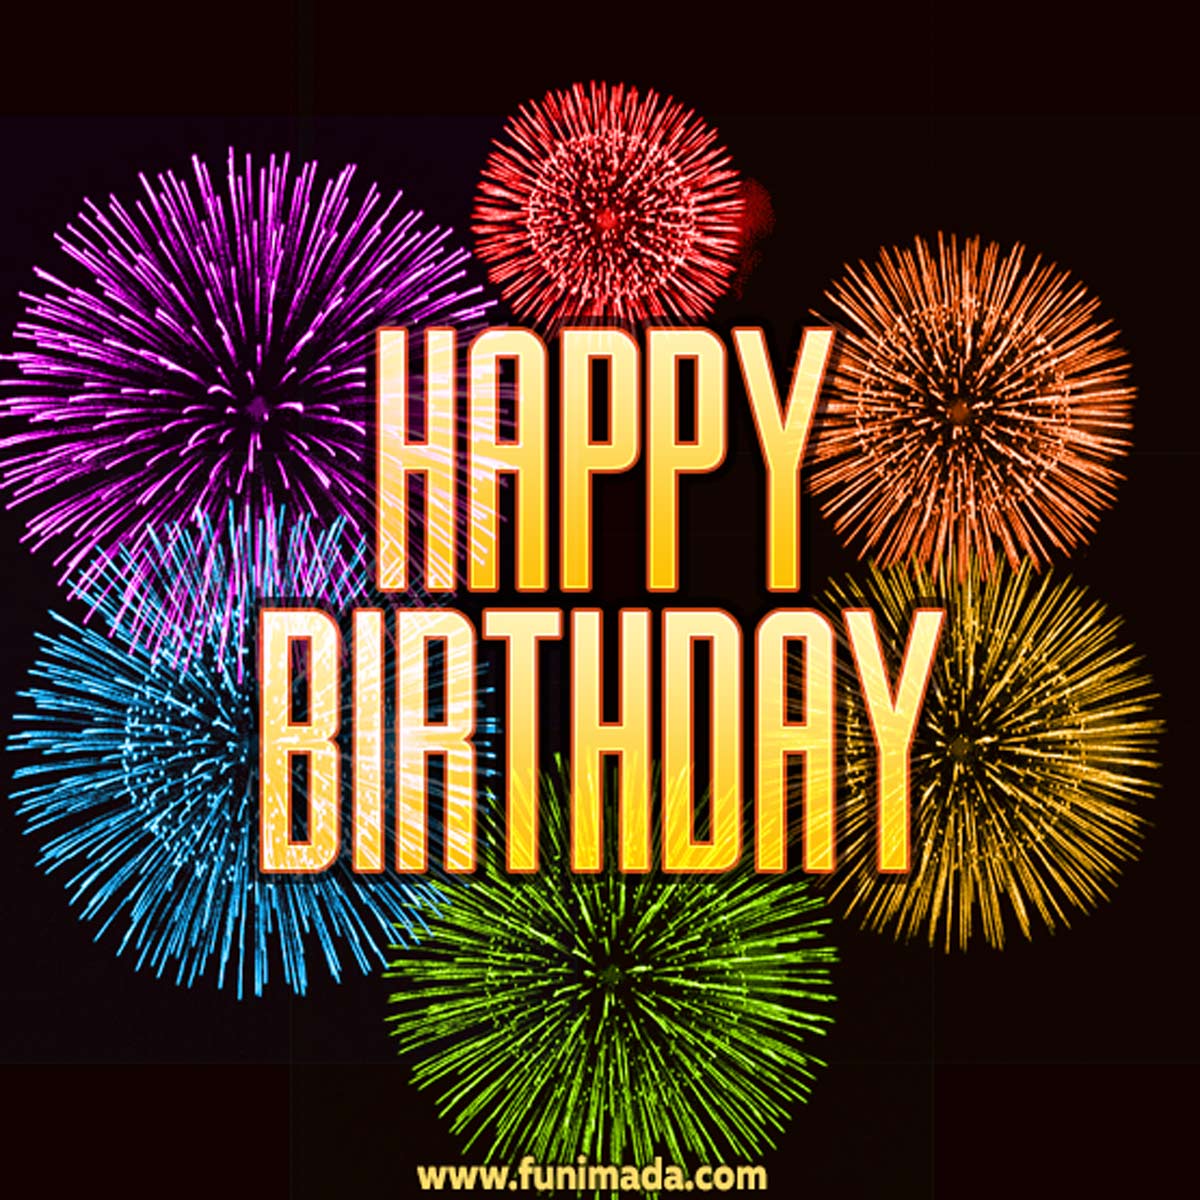 New] Happy Birthday Animated (GIF) Greeting Card - Multicolored ...